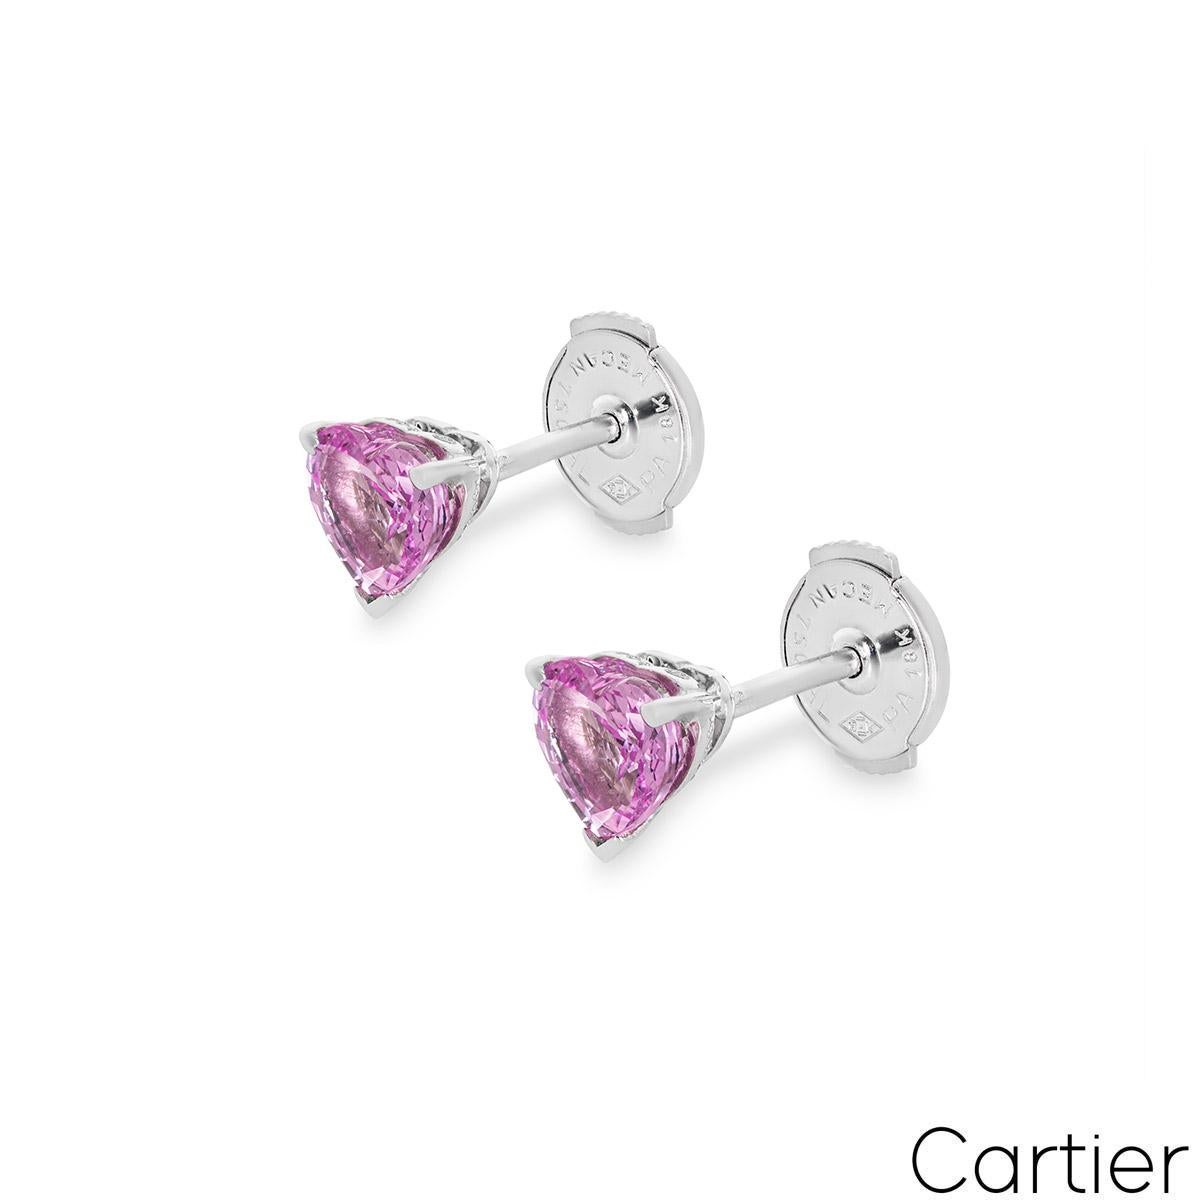 A lovely pair of 18k white gold pink sapphire stud earrings by Cartier. The earrings each feature a heart shaped pink sapphire set in a three prong mount with an approximate total weight of 1.20ct, displaying a vibrant pink hue. They finish with